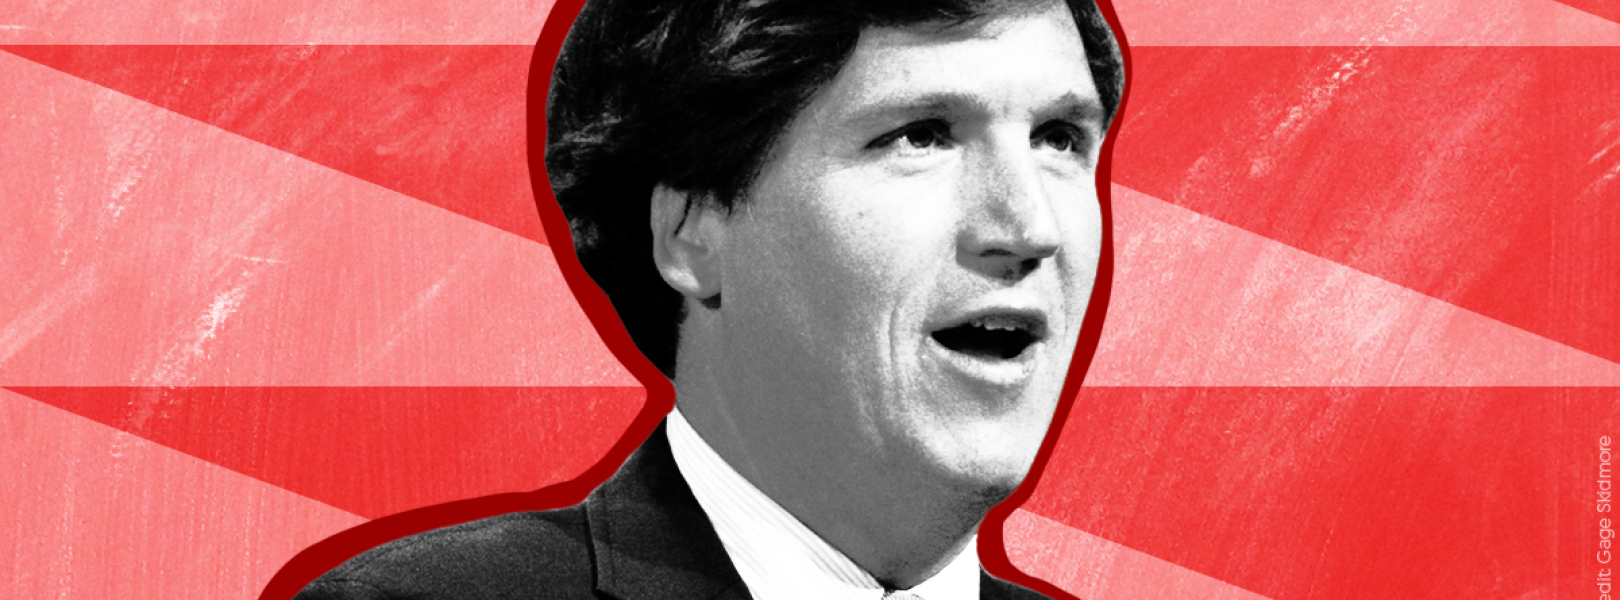 White-Supremacists-Tucker-Carlson.png